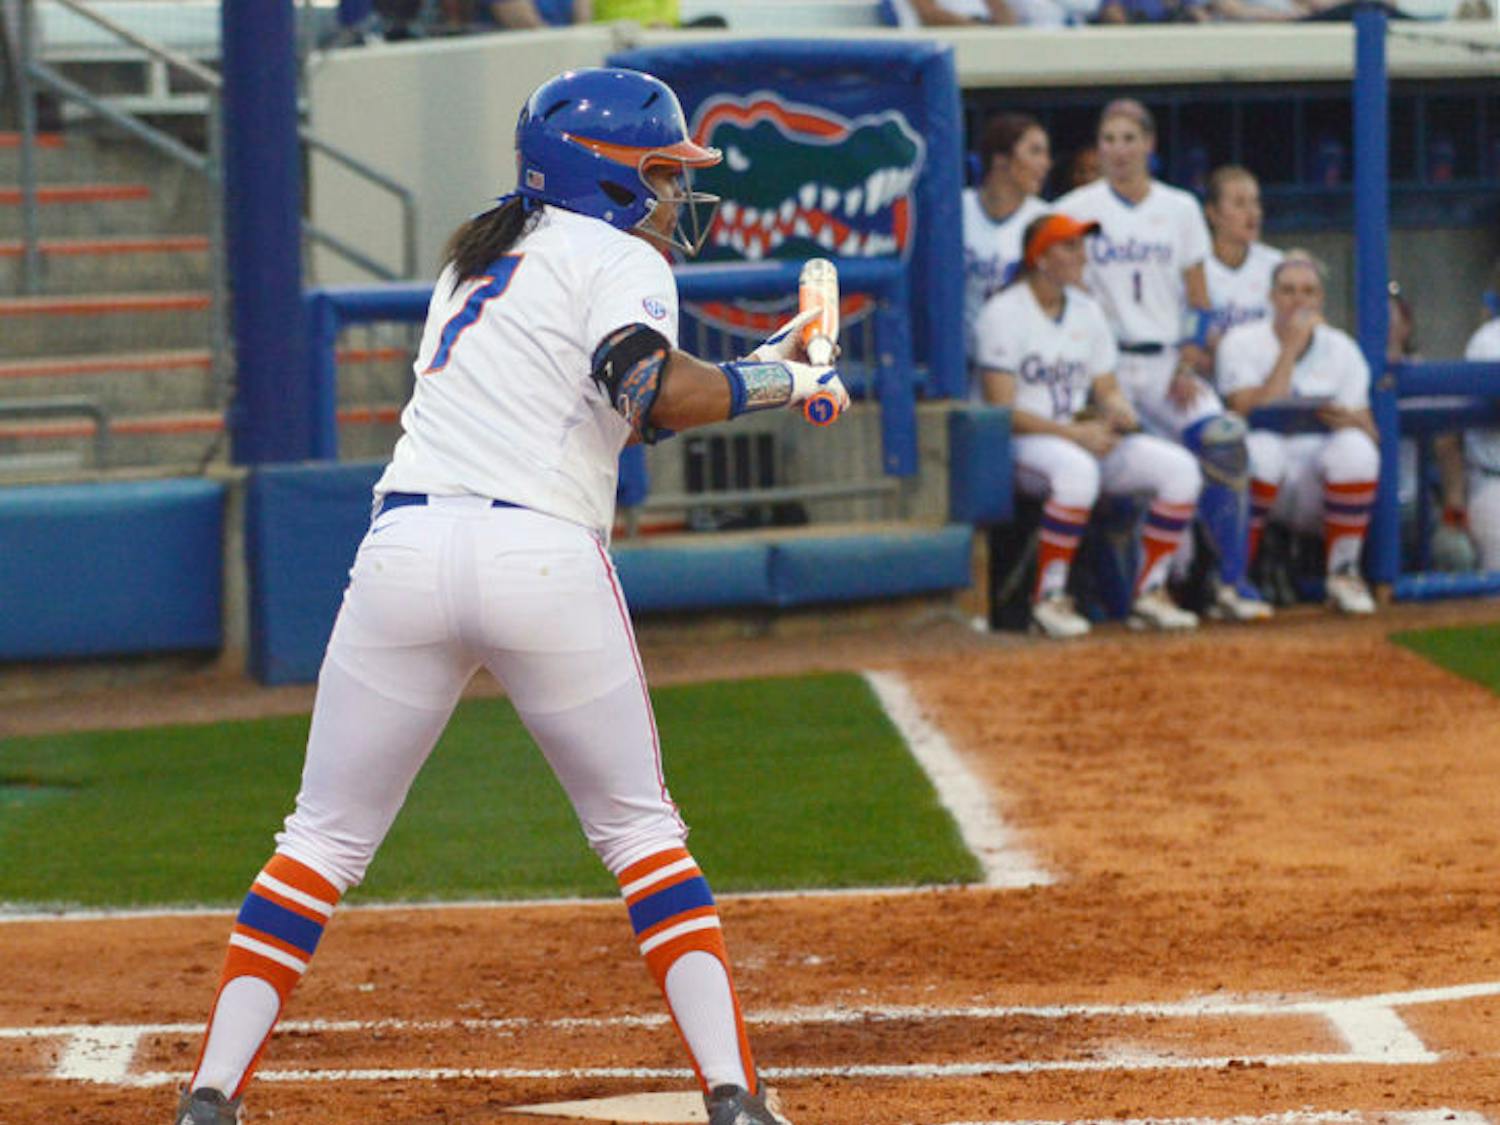 Kelsey Stewart attempts a bunt during Florida’s win against Jacksonville on Feb. 19 at Katie Seashole Pressly Stadium. Stewart leads UF with a .432 batting average.